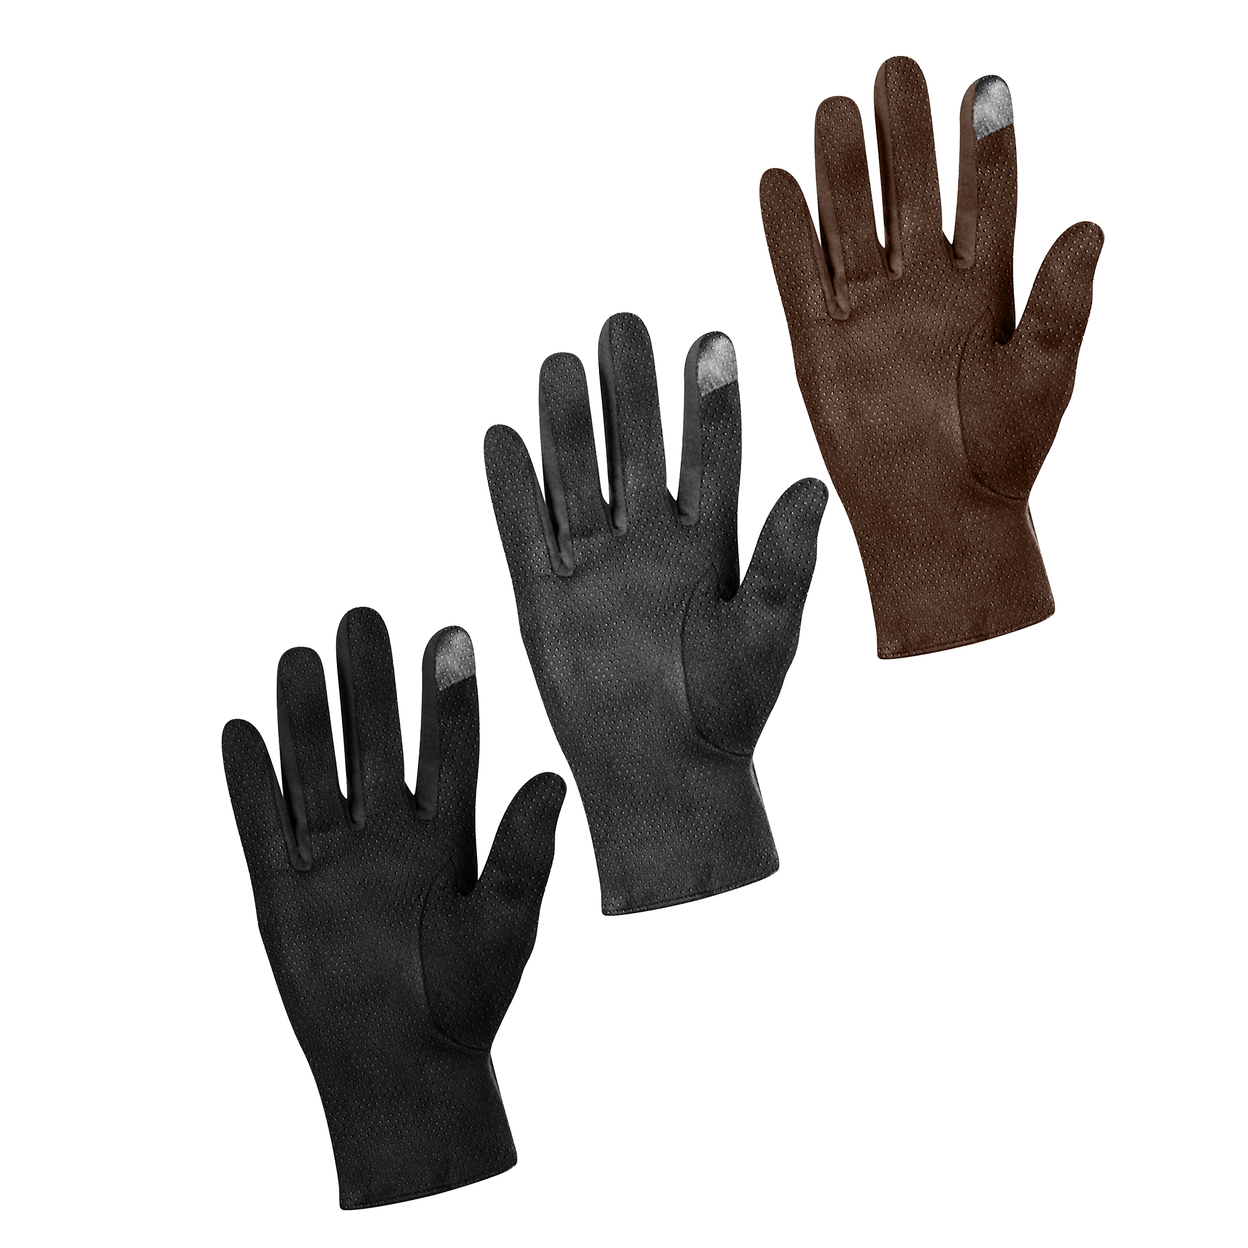 2-Pairs: Winter Warm Soft Lining Weather-Proof Touchscreen Suede Insulated Gloves - Black & Navy